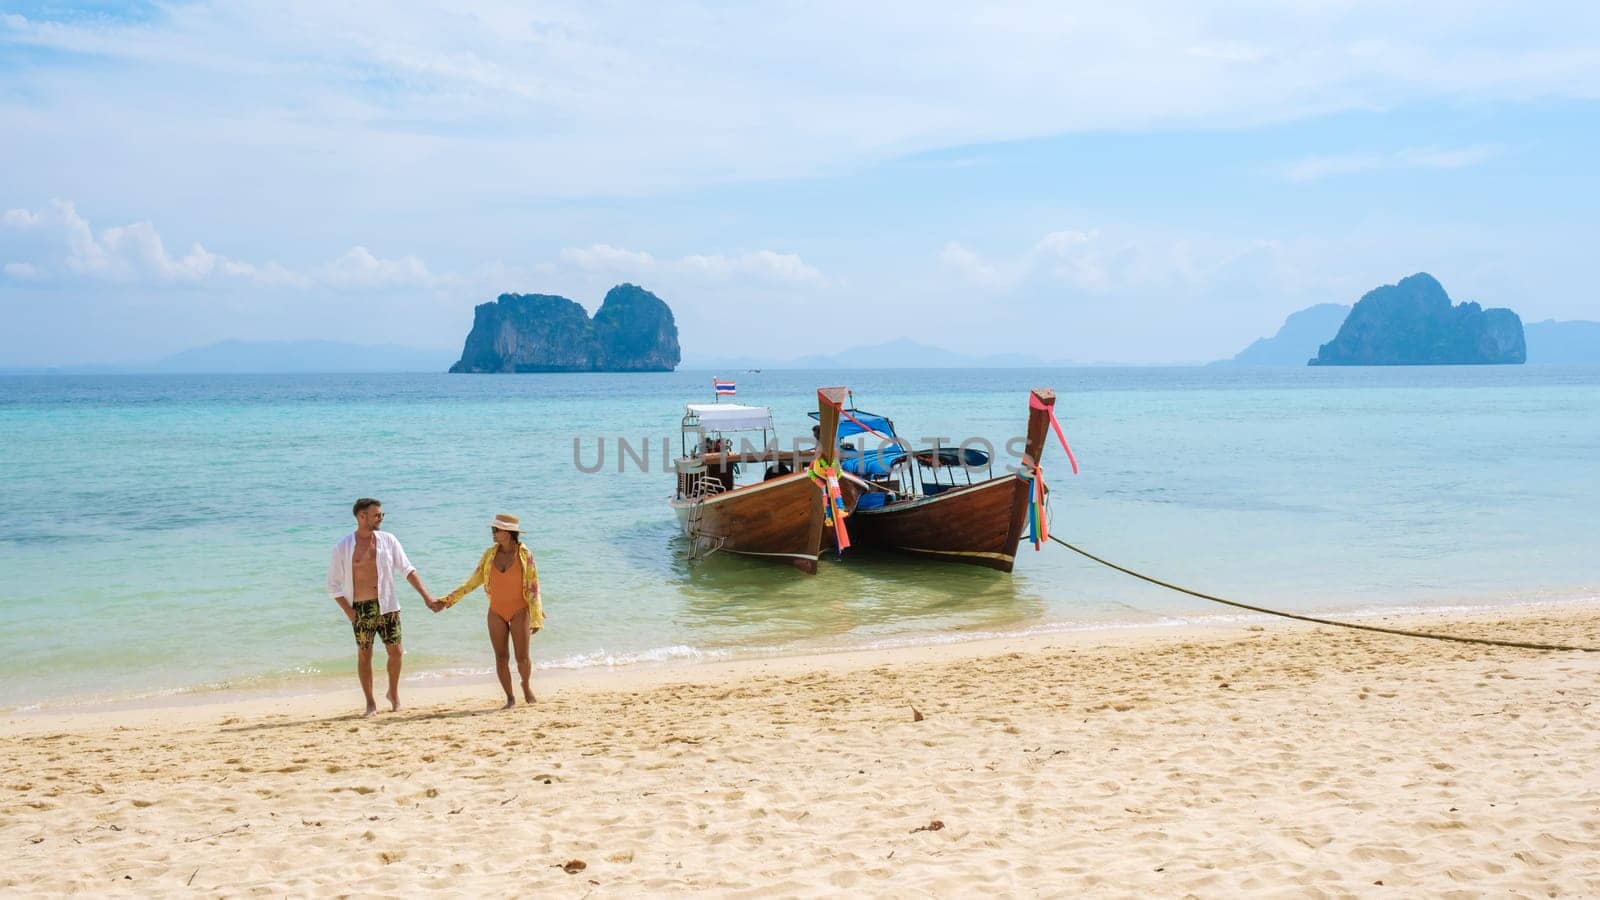 a couple of men and woman walking on the beach with longtail boats in the ocean of Koh Ngai island soft white sand, and a turqouse colored ocean in Koh Ngai Trang Thailand